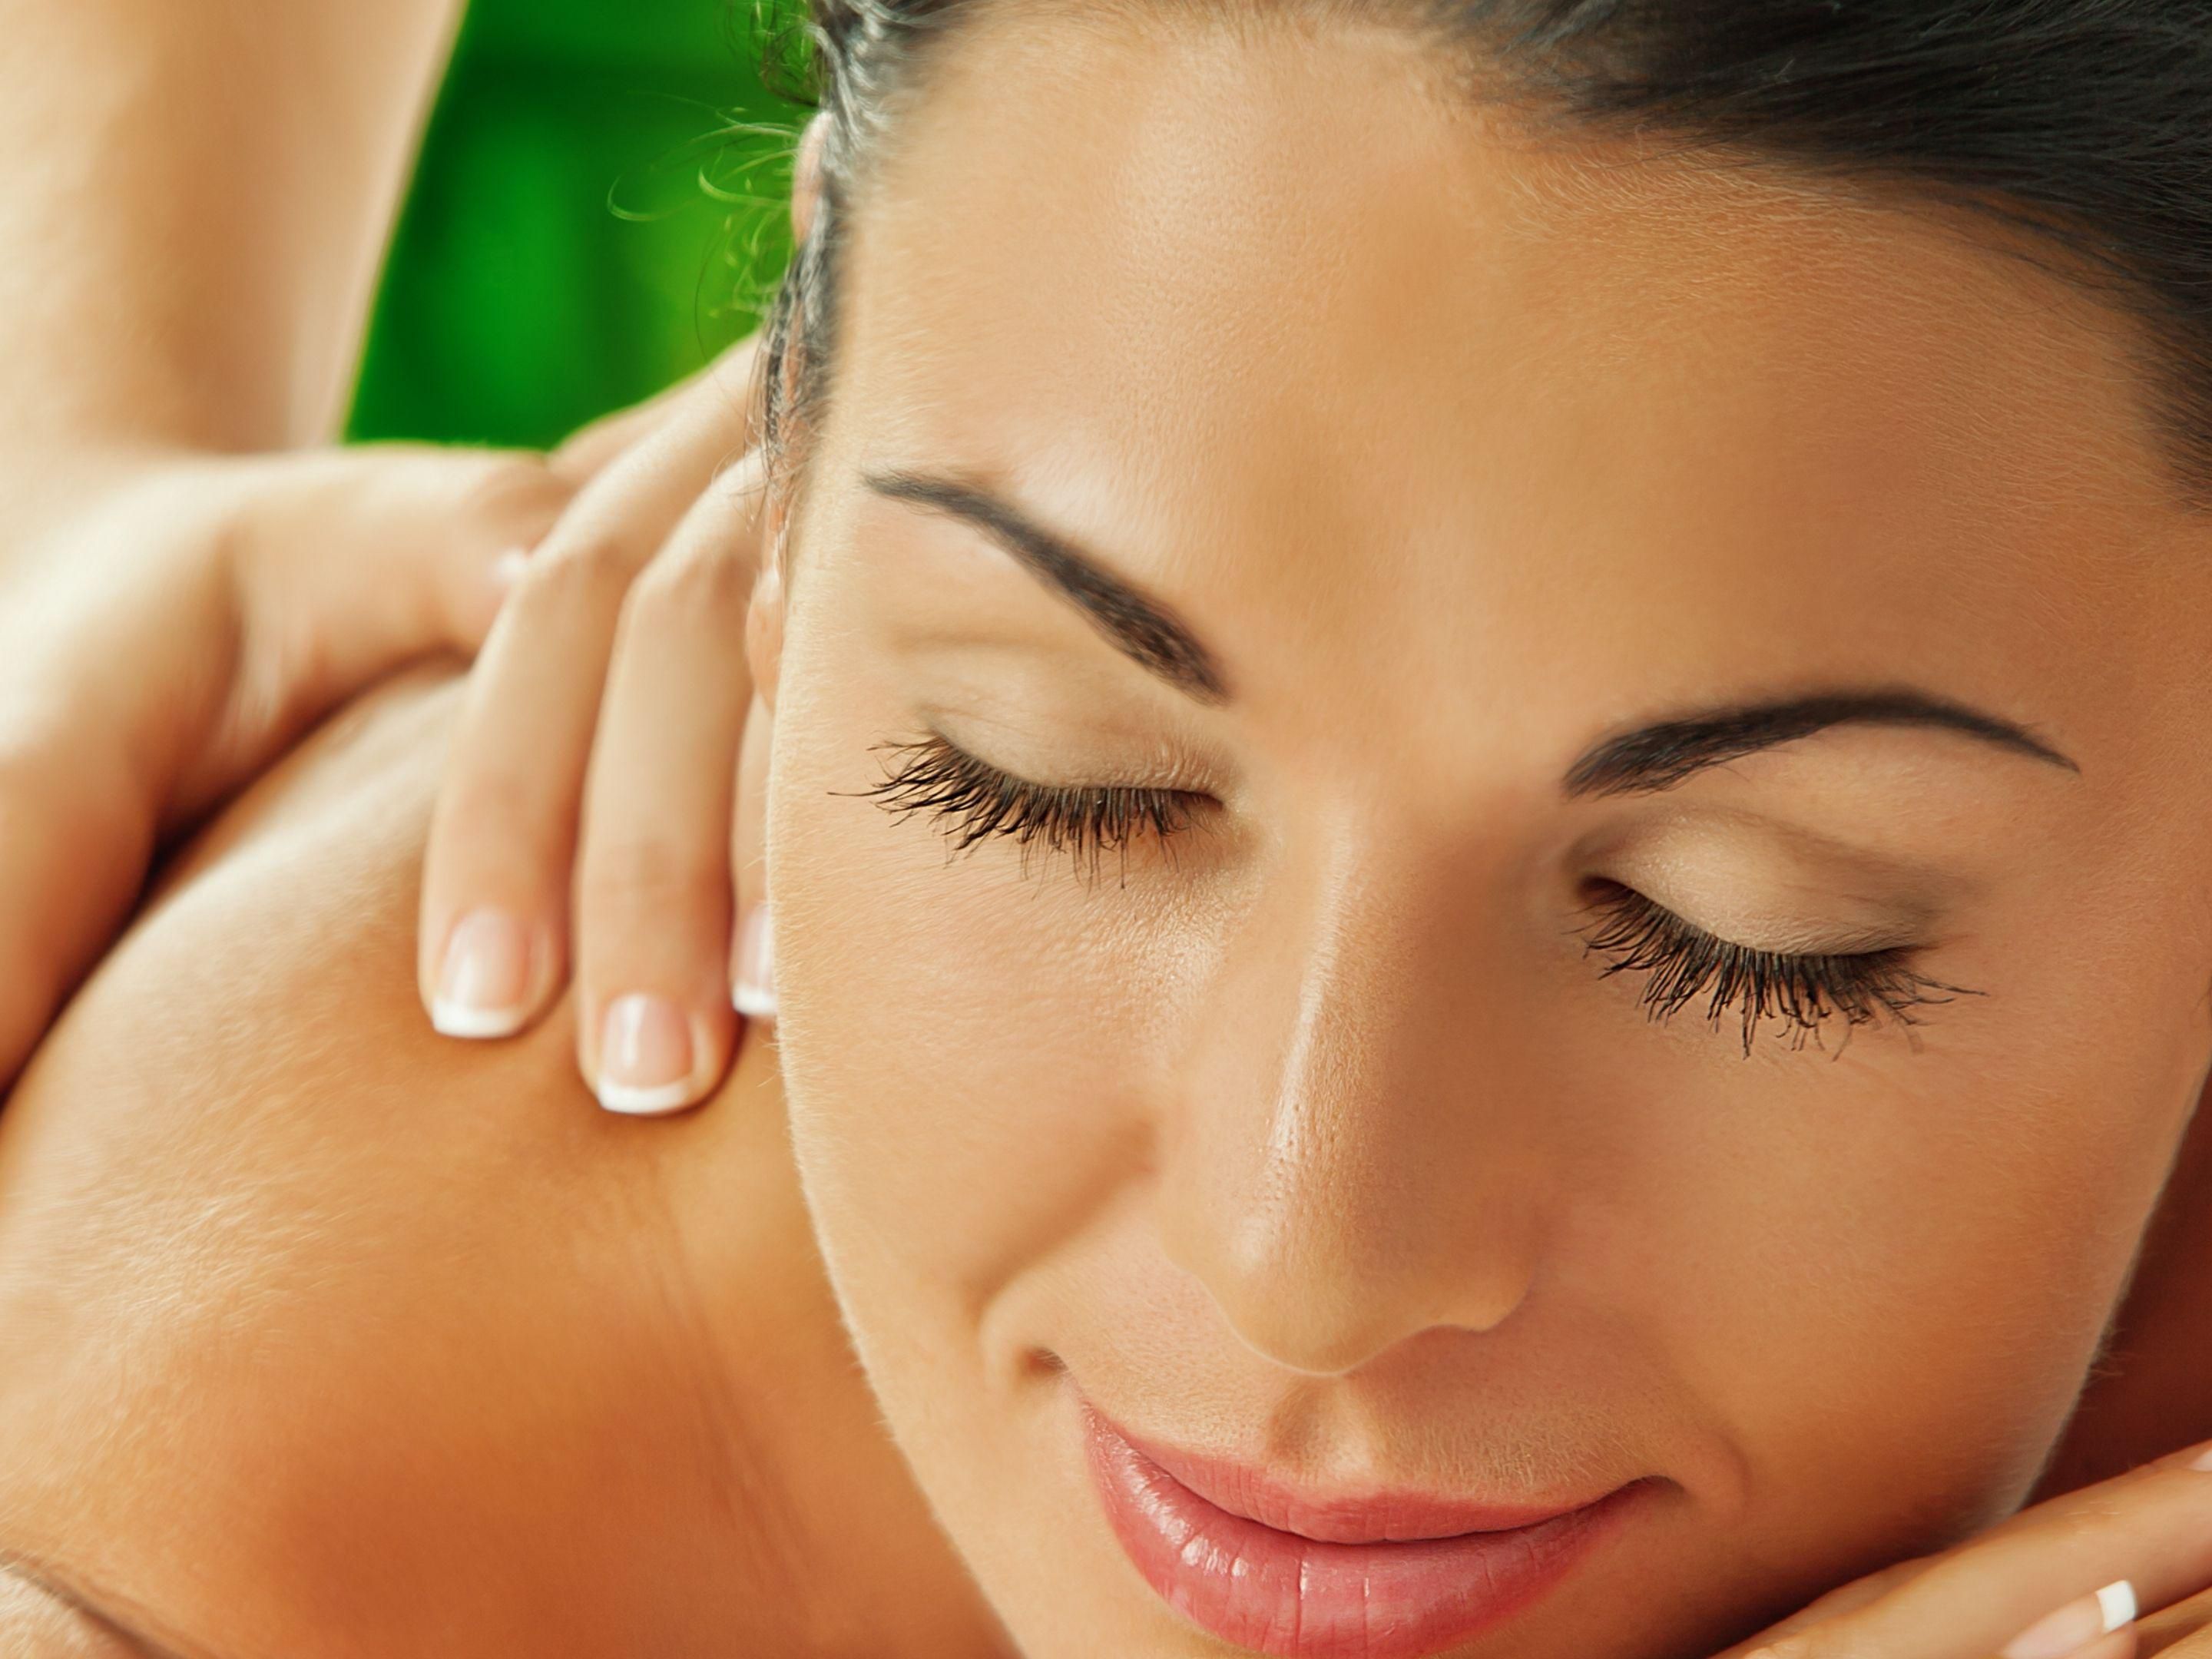 Embark on a journey of rejuvenation and relaxation at Holiday Inn & Suites SPA with an array of nurturing elements from our unique spa brands and expert therapists. Indulge in tranquilizing massage therapies, personalized treatments and reviving facials to recharge and rewind mind, body and soul.